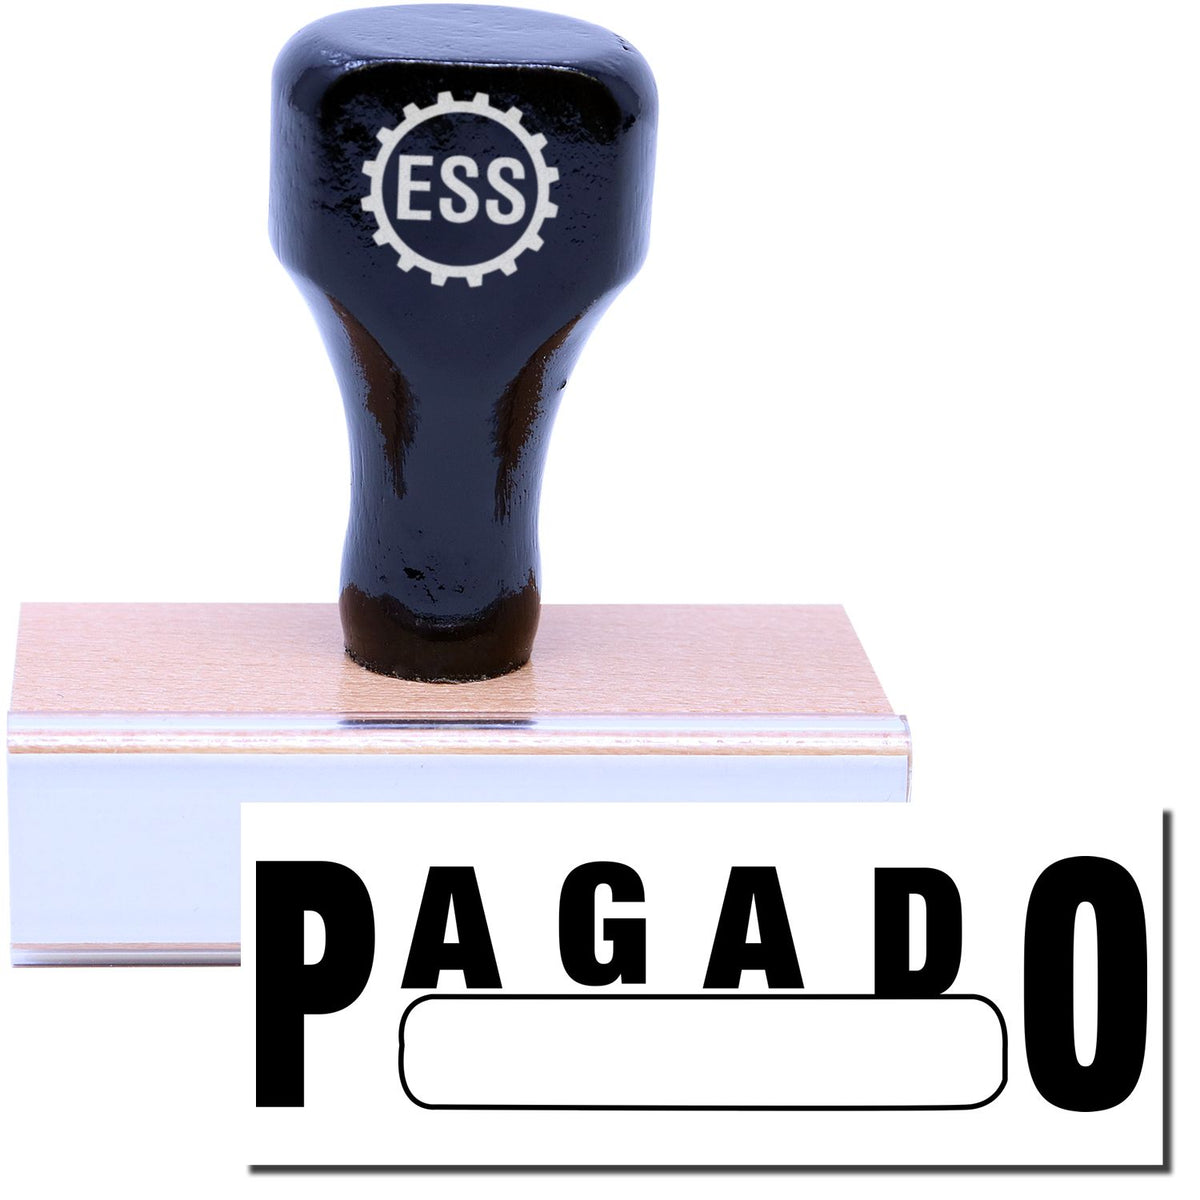 Pagado with Box Rubber Stamp